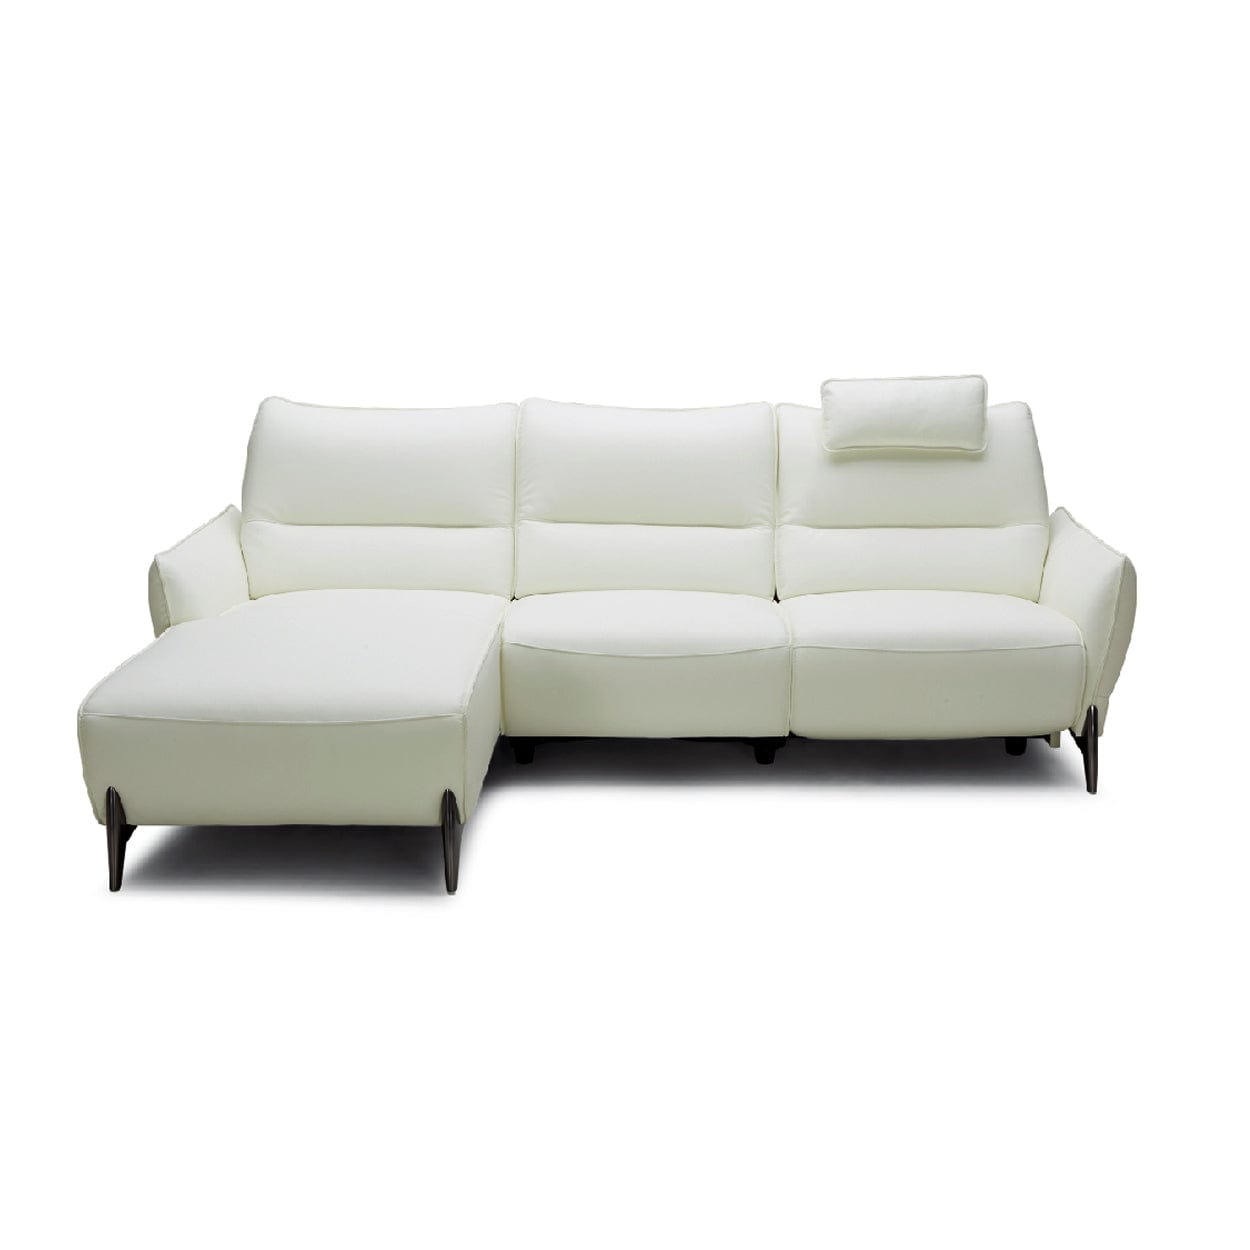 KUKA #2668 Full Leather Sofa (2/3-Seater, Chaise Lounge) (M Series) (I) picket and rail